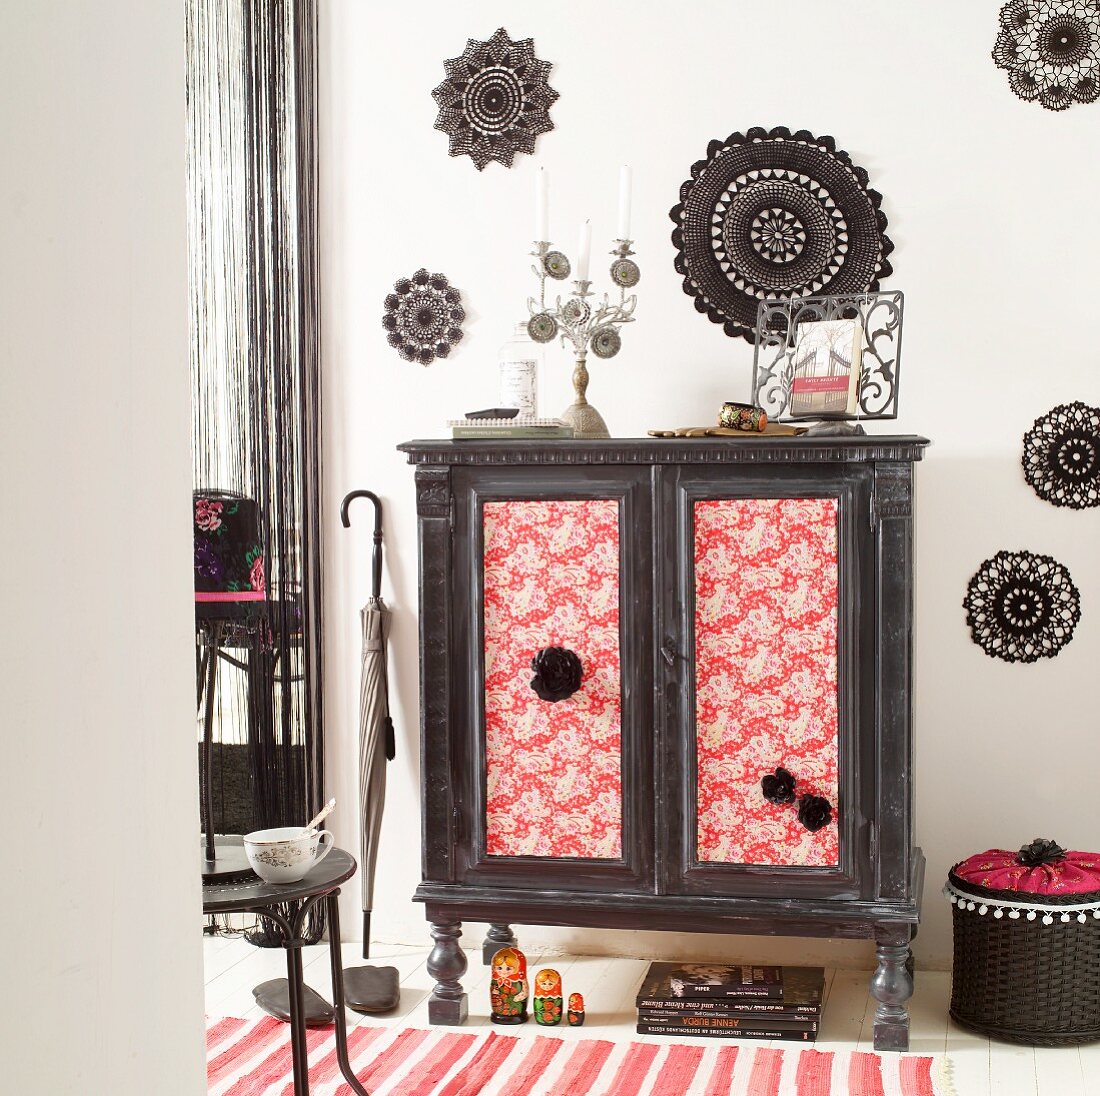 Make-over - vintage cabinet with fabric-covered, ethnic-style doors against wall decorated with black crocheted doilies